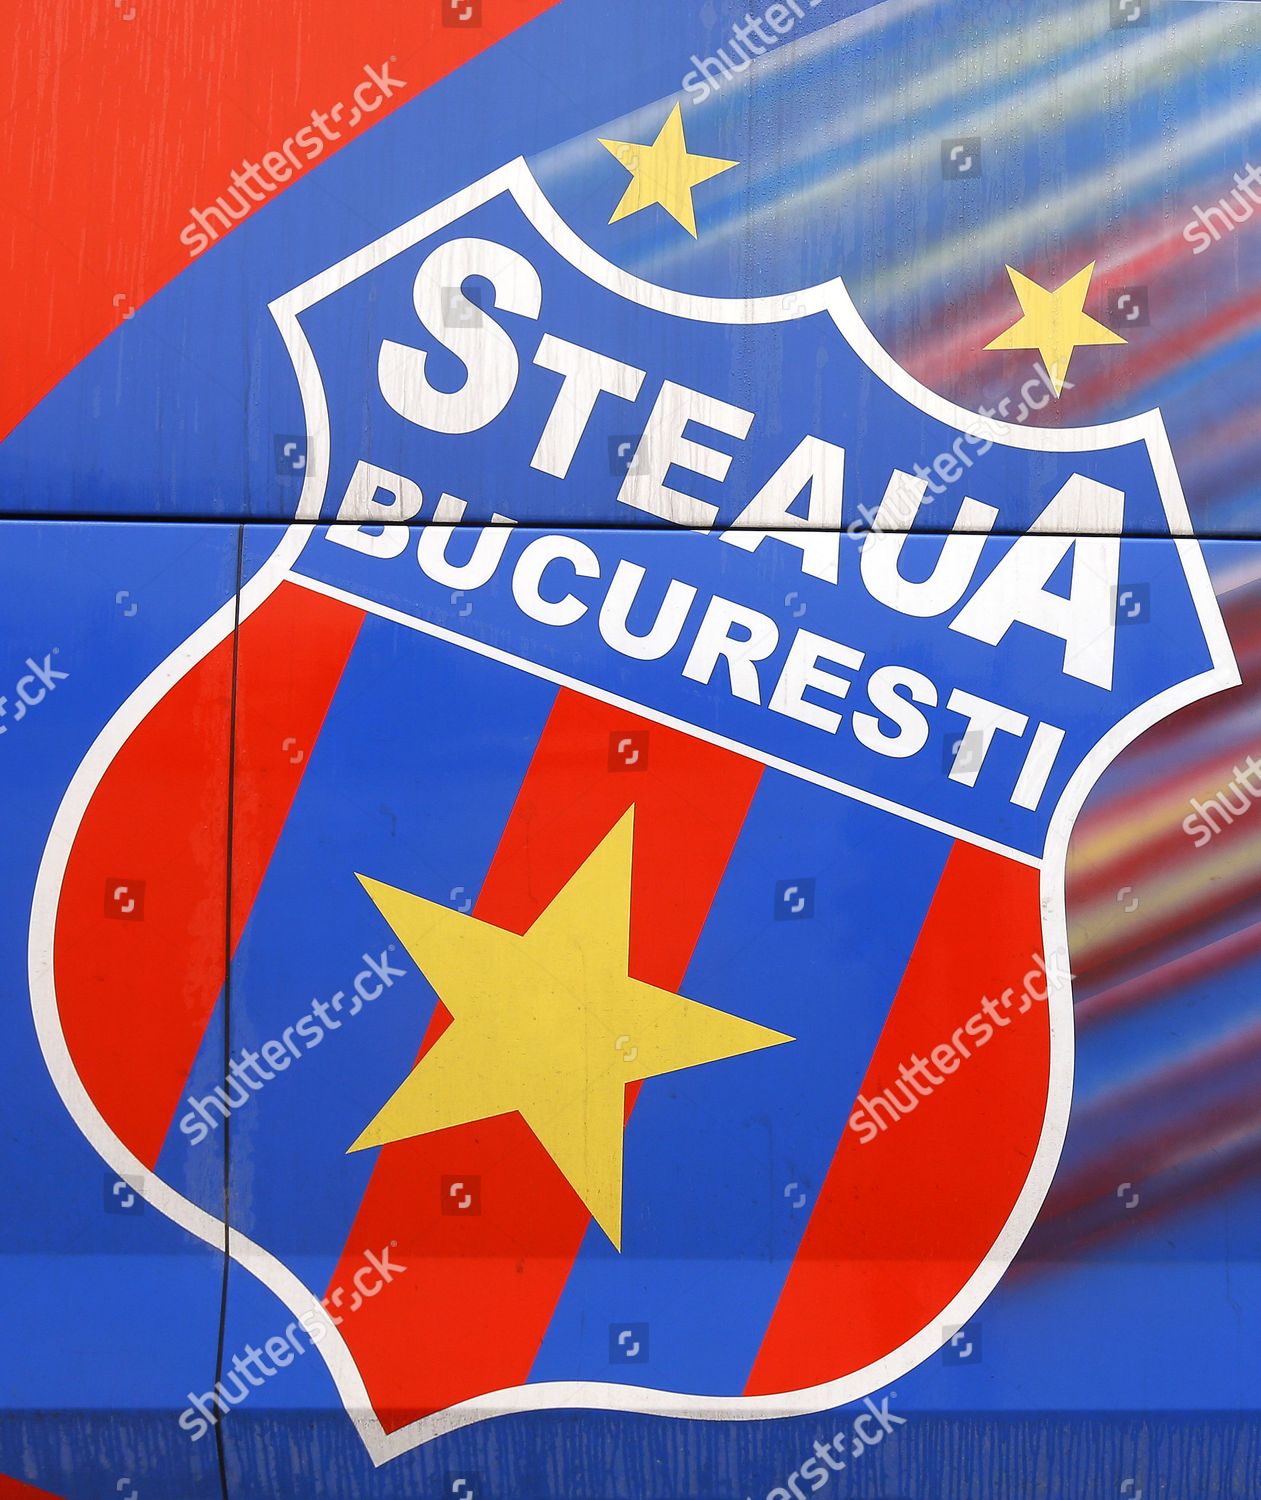 Steaua Bucharest team group in 1986.  Football team pictures, Team photos,  Team pictures